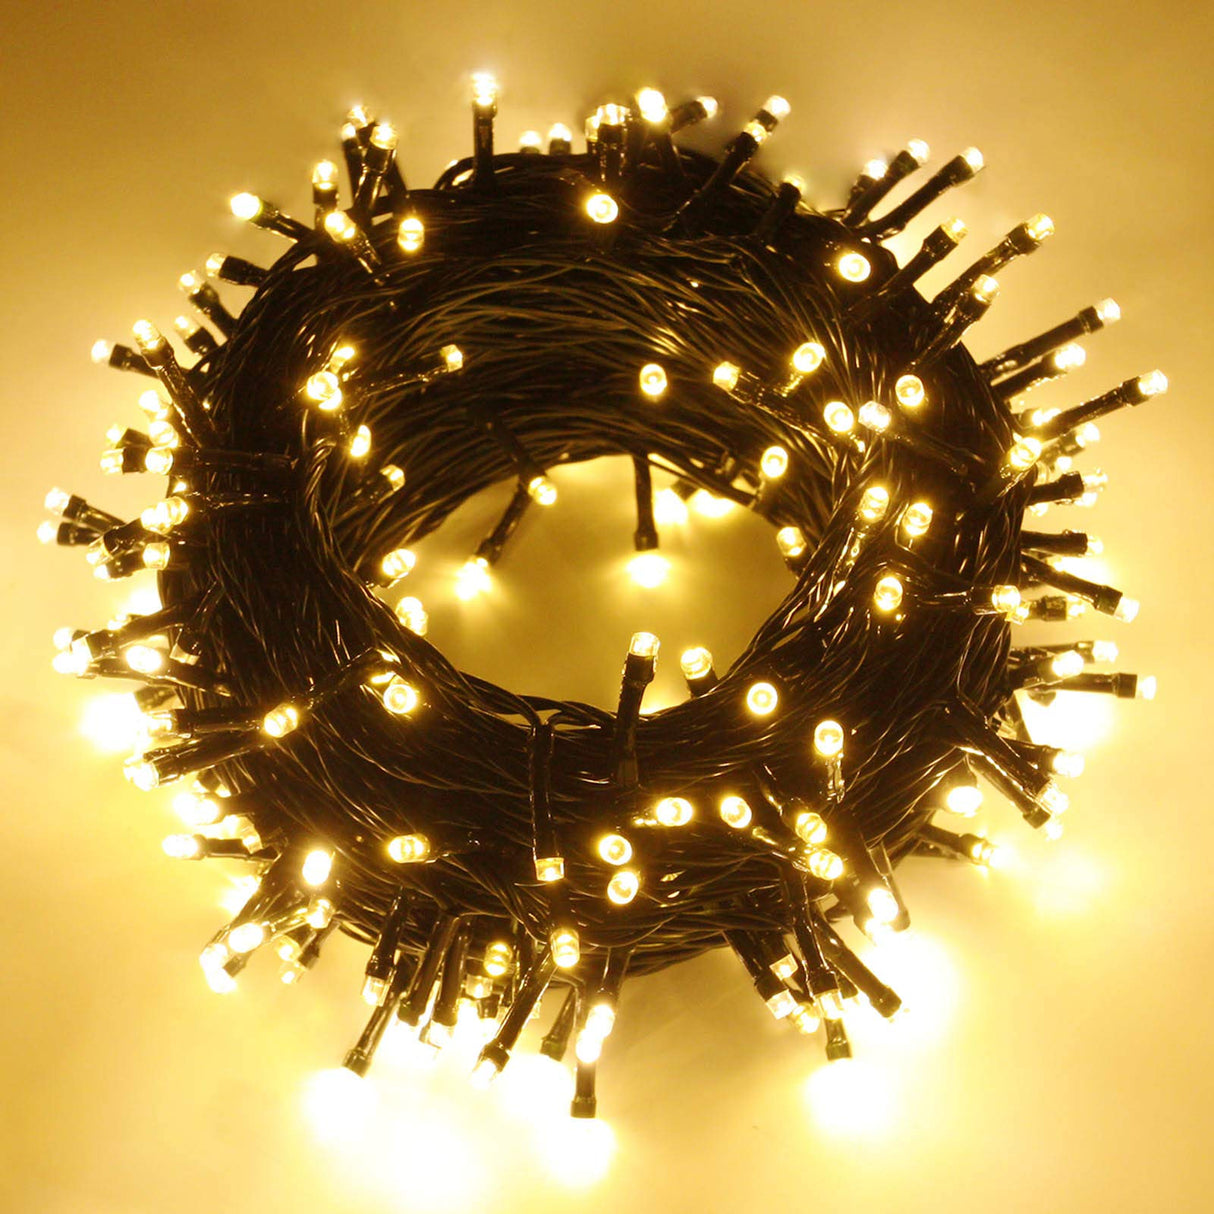 150 LED String Lights, Waterproof Extendable Twinkle Lights 8 Modes Fairy Lights Plug in (Warm White)